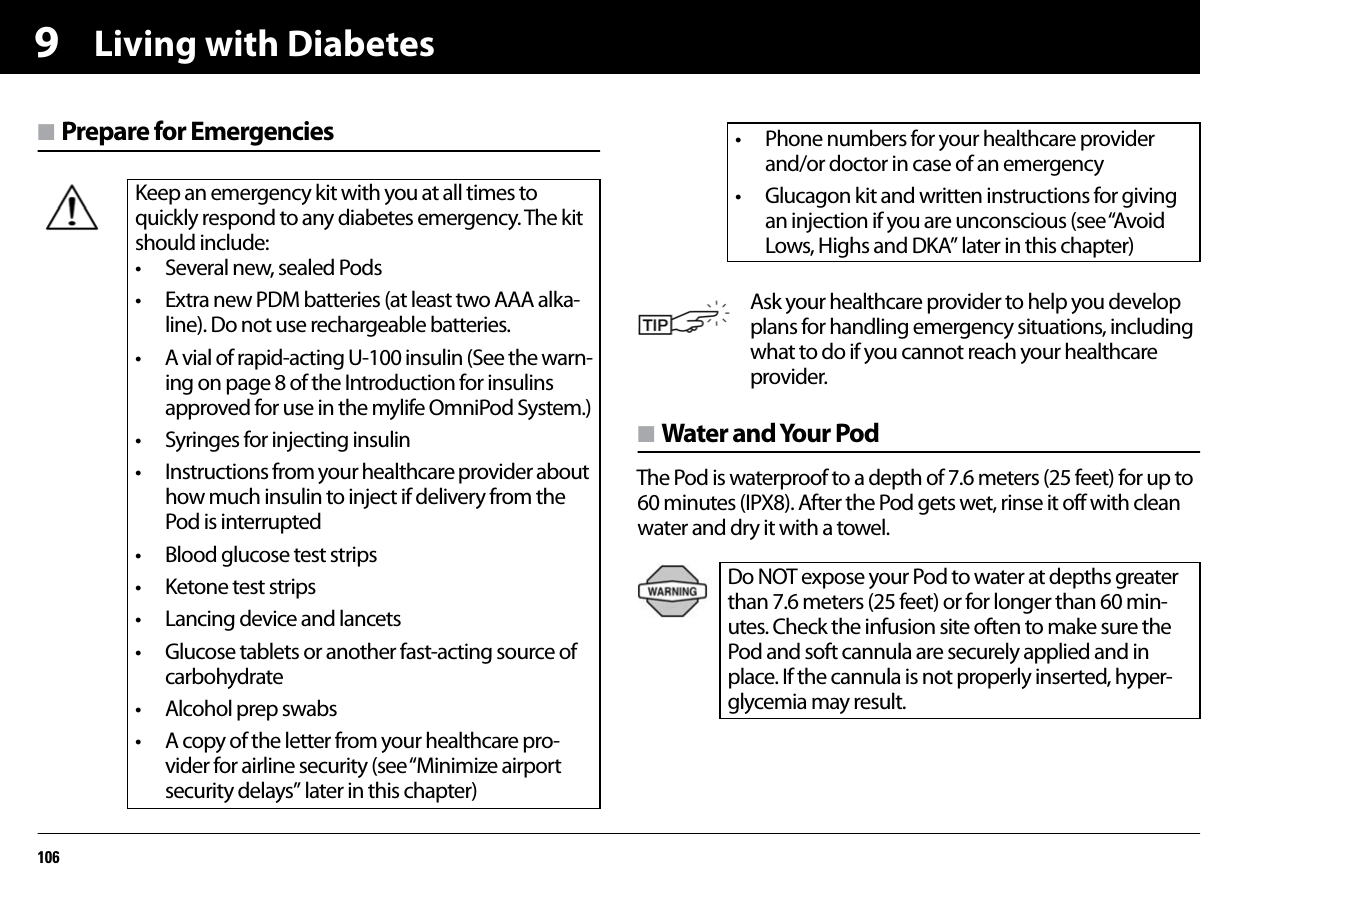 Living with Diabetes1069n Prepare for Emergenciesn Water and Your PodThe Pod is waterproof to a depth of 7.6 meters (25 feet) for up to 60 minutes (IPX8). After the Pod gets wet, rinse it off with clean water and dry it with a towel.   Keep an emergency kit with you at all times to quickly respond to any diabetes emergency. The kit should include:• Several new, sealed Pods• Extra new PDM batteries (at least two AAA alka-line). Do not use rechargeable batteries.• A vial of rapid-acting U-100 insulin (See the warn-ing on page 8 of the Introduction for insulins approved for use in the mylife OmniPod System.)• Syringes for injecting insulin• Instructions from your healthcare provider about how much insulin to inject if delivery from the Pod is interrupted• Blood glucose test strips• Ketone test strips• Lancing device and lancets• Glucose tablets or another fast-acting source of carbohydrate• Alcohol prep swabs• A copy of the letter from your healthcare pro-vider for airline security (see “Minimize airport security delays” later in this chapter)• Phone numbers for your healthcare provider and/or doctor in case of an emergency• Glucagon kit and written instructions for giving an injection if you are unconscious (see “Avoid Lows, Highs and DKA” later in this chapter)Ask your healthcare provider to help you develop plans for handling emergency situations, including what to do if you cannot reach your healthcare provider.Do NOT expose your Pod to water at depths greater than 7.6 meters (25 feet) or for longer than 60 min-utes. Check the infusion site often to make sure the Pod and soft cannula are securely applied and in place. If the cannula is not properly inserted, hyper-glycemia may result.